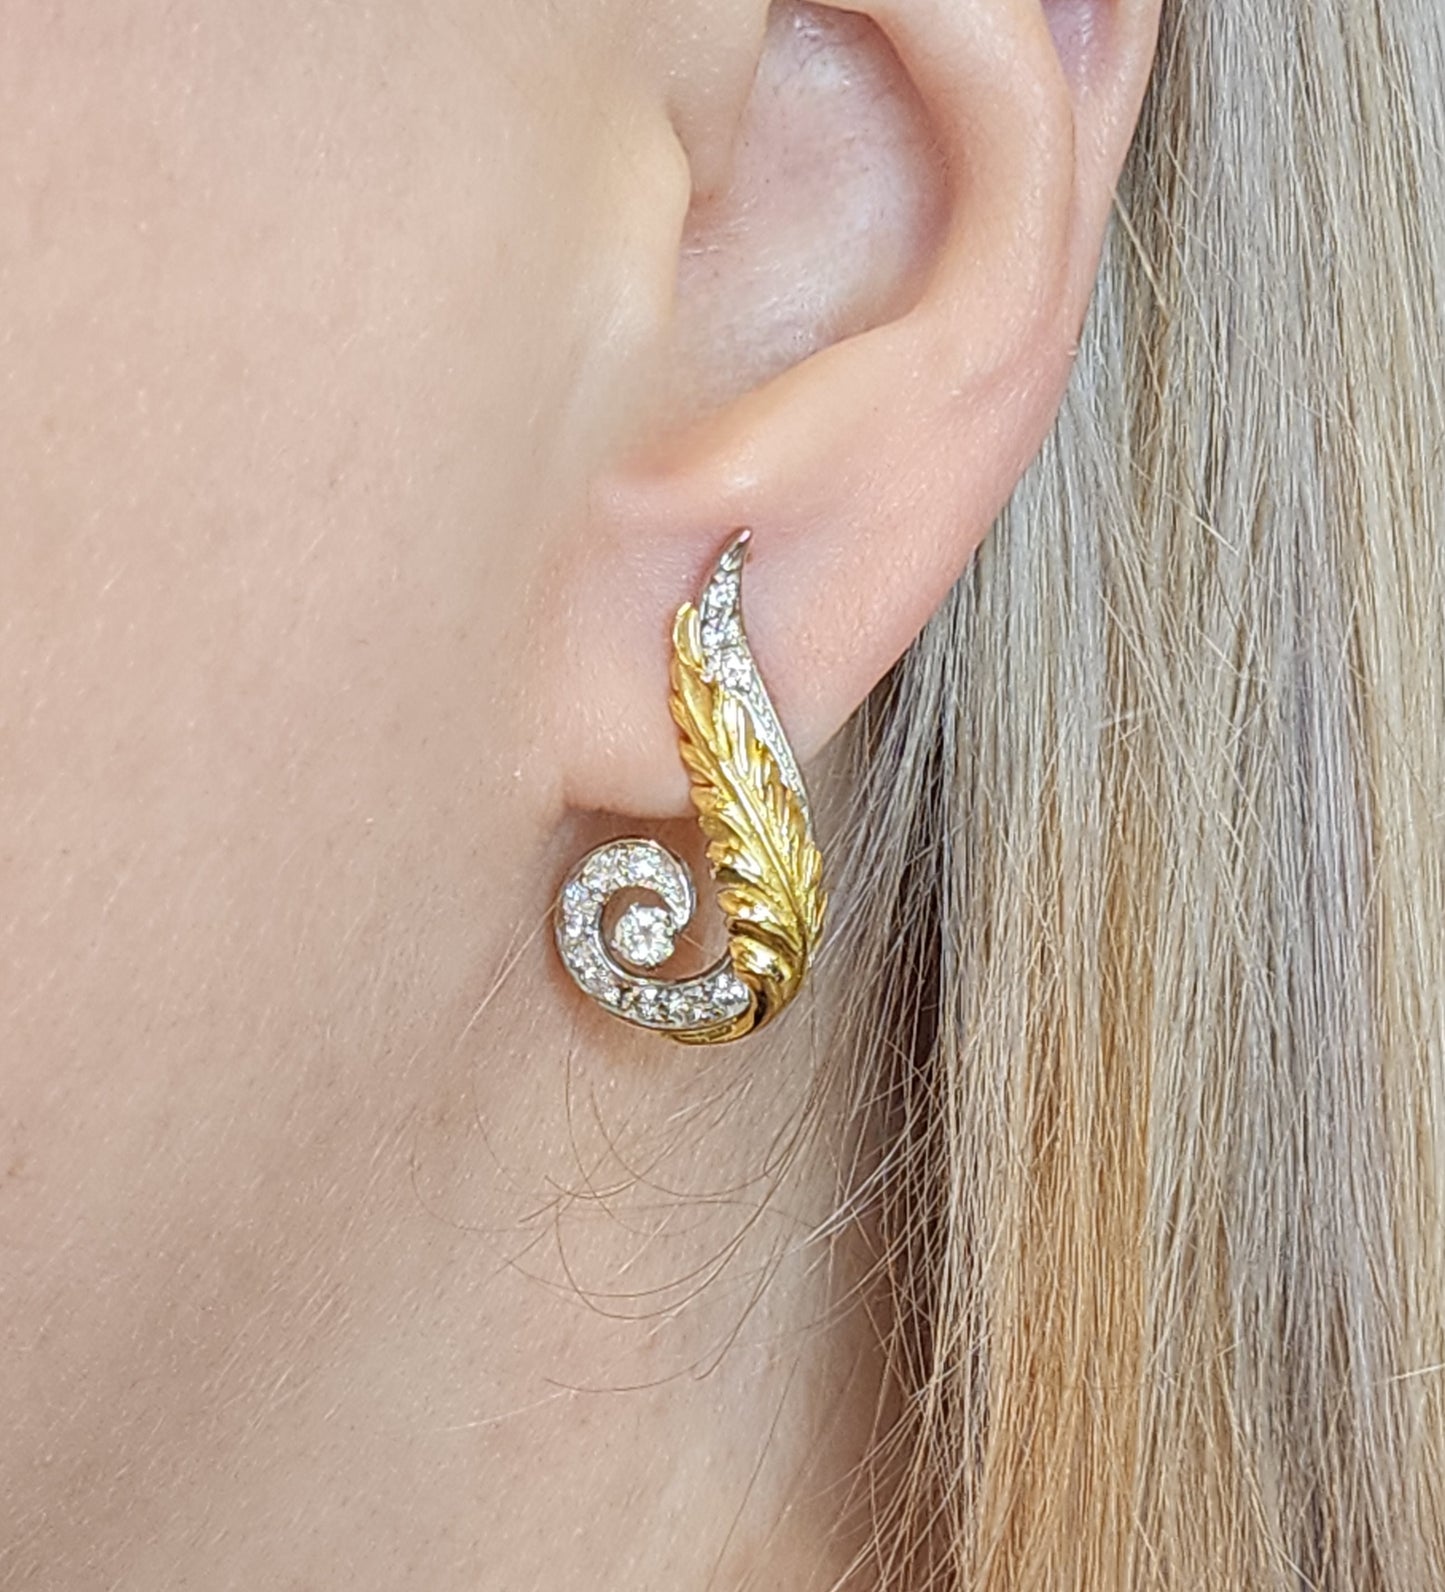 Vintage Diamond Swirl Drop Earrings in Platinum and 18K Yellow Gold